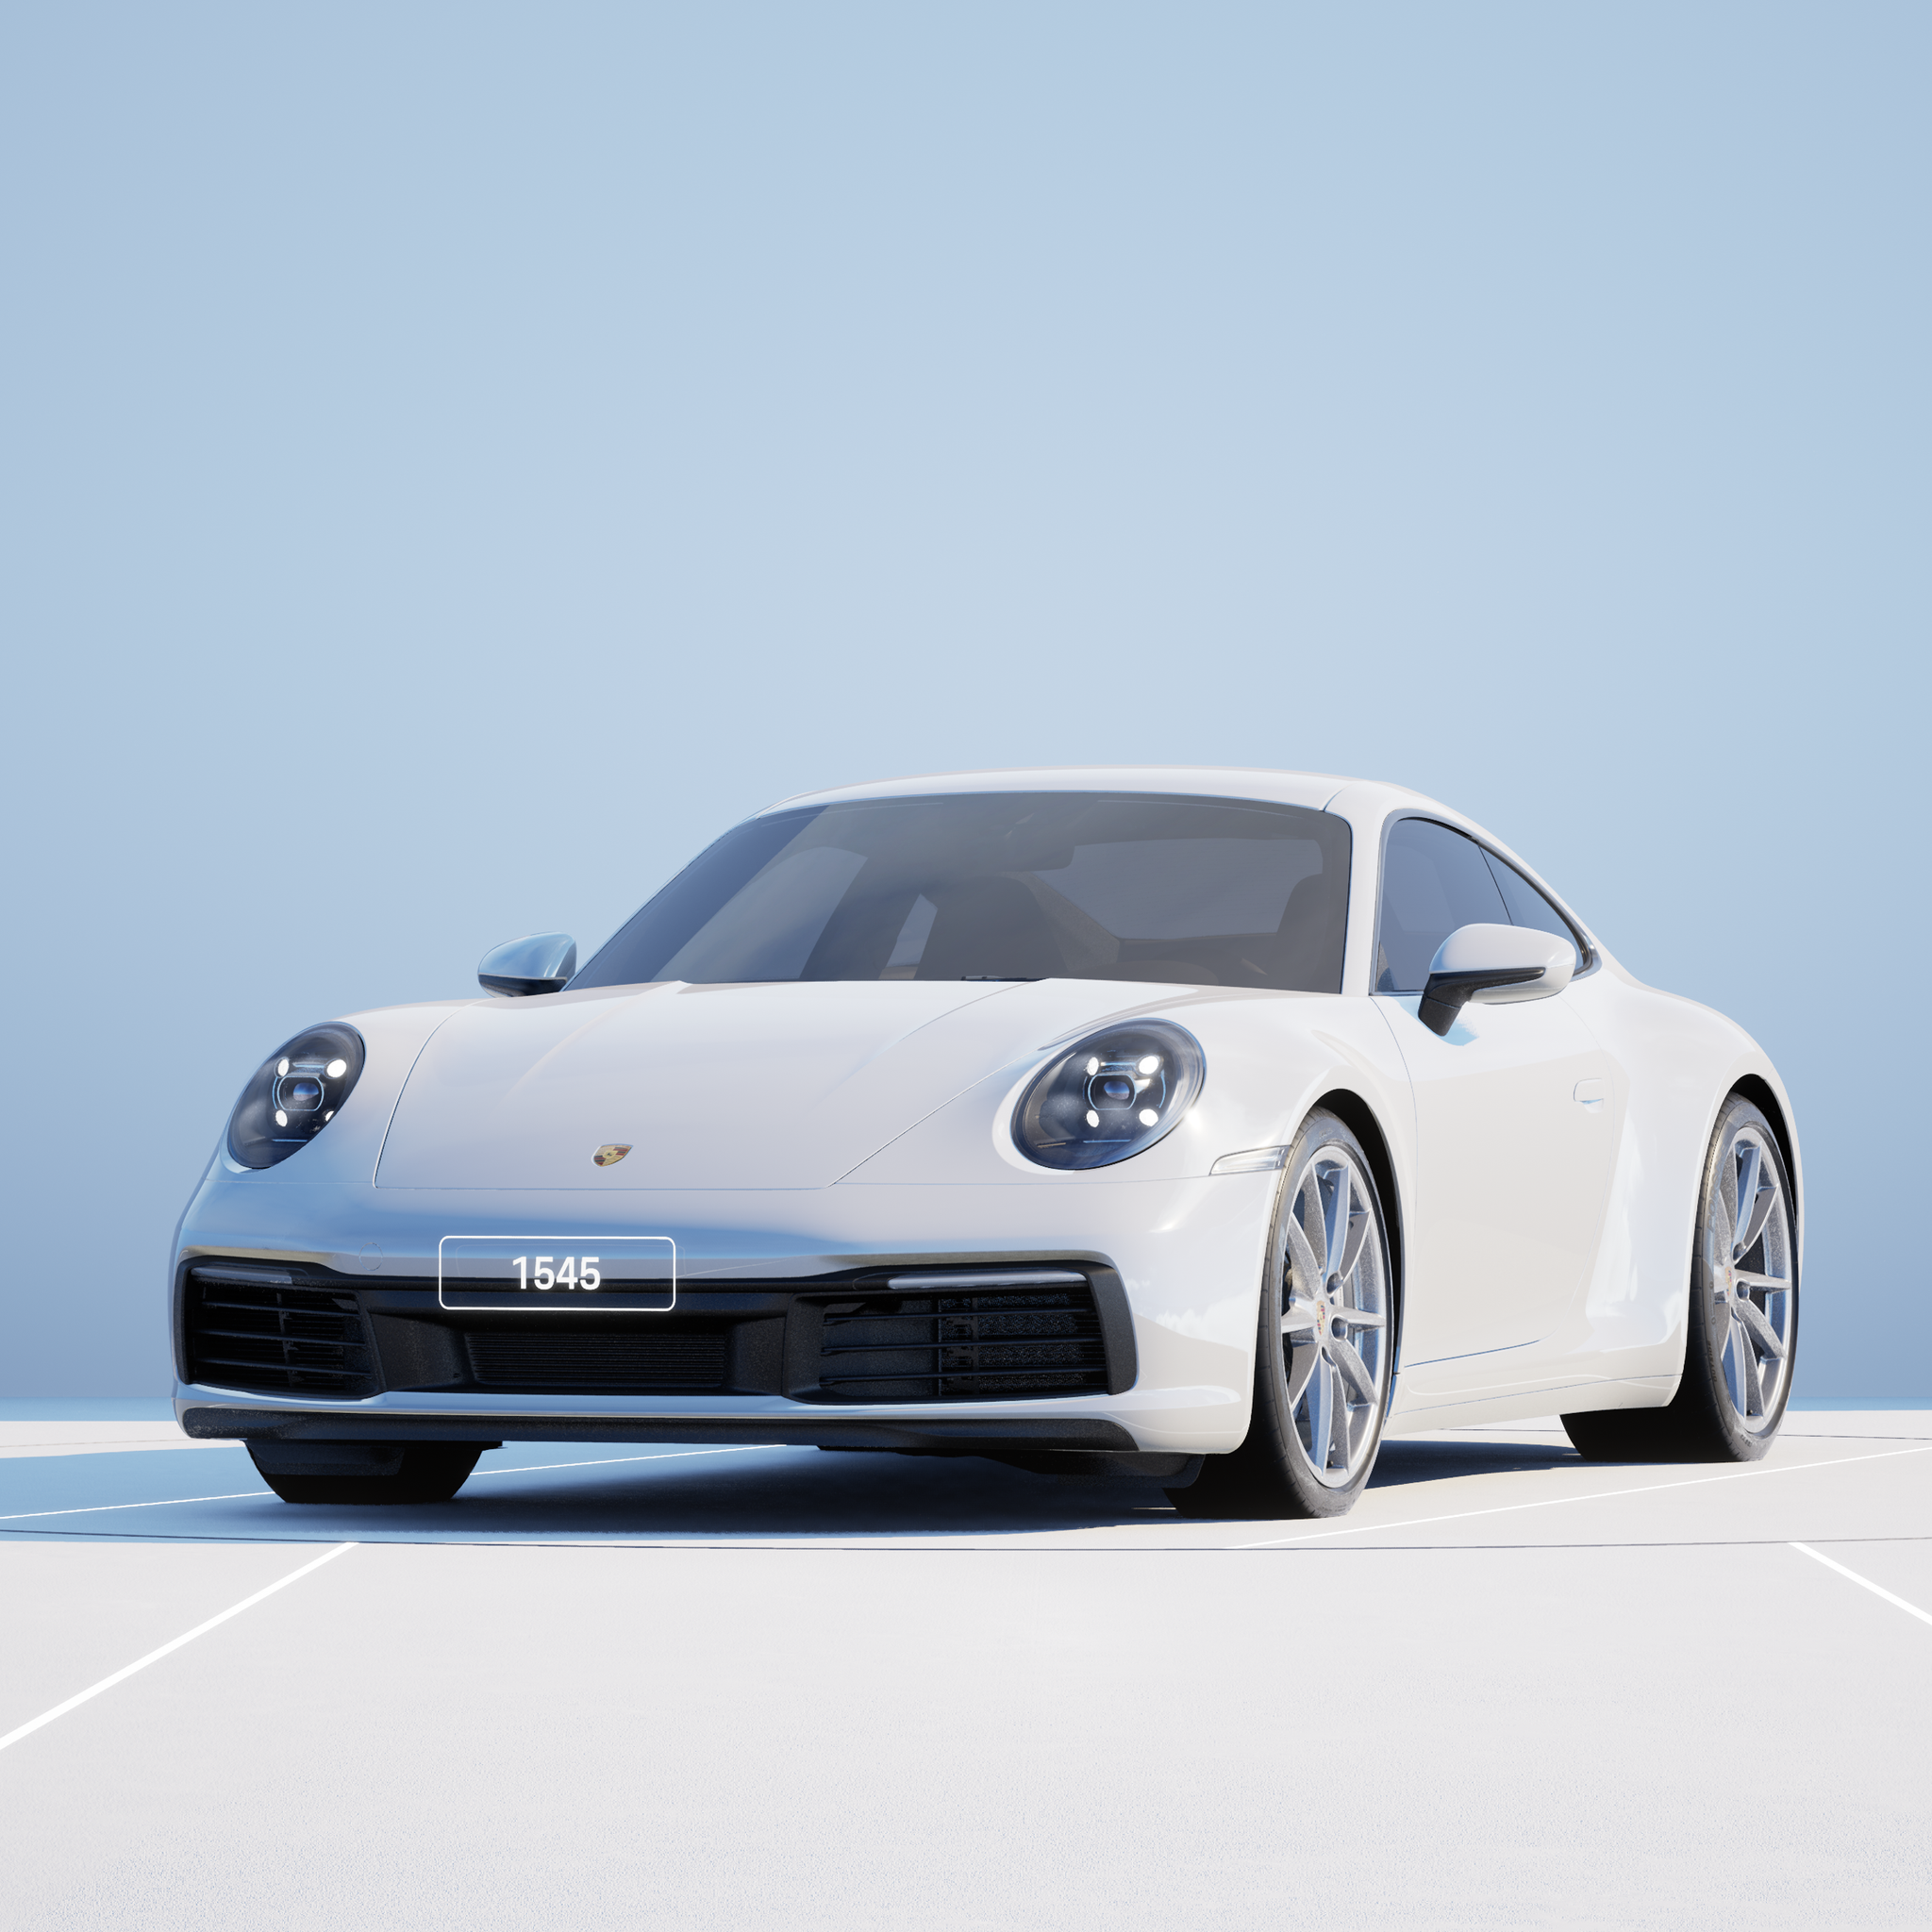 The PORSCHΞ 911 1545 image in phase